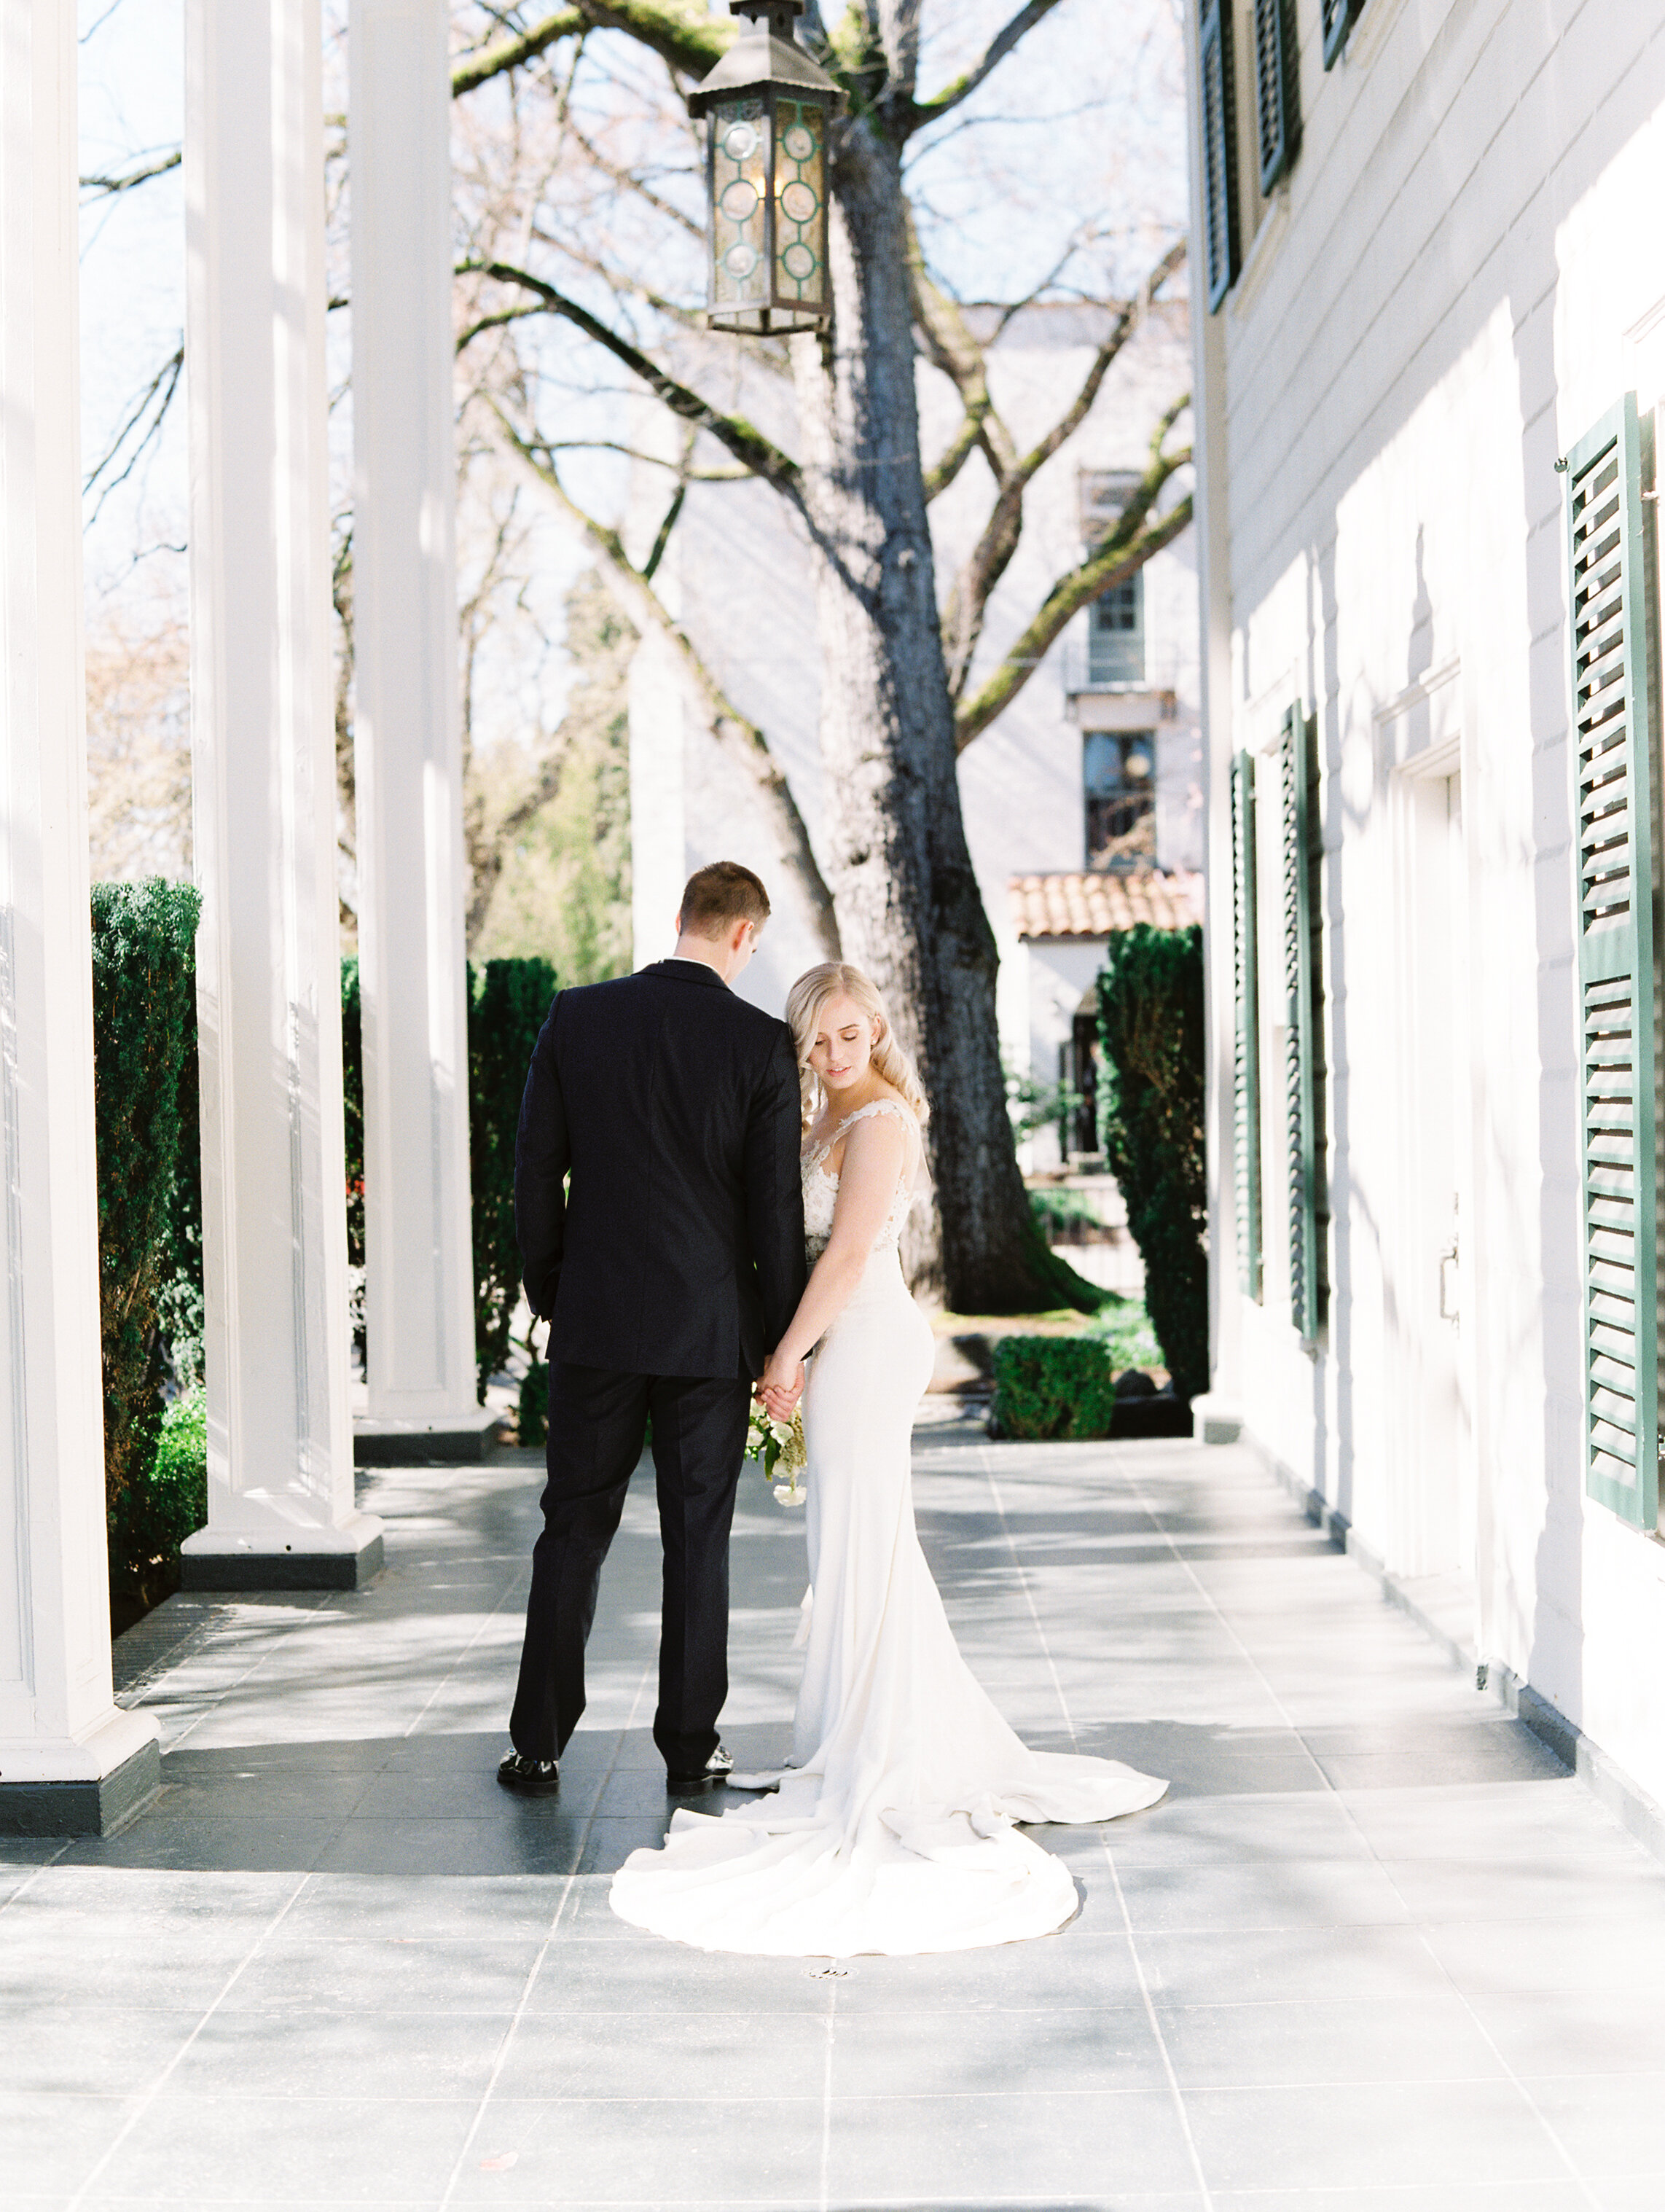 DAR Rainier Chapter House Seattle Wedding Planners | Pacific Engagements Seattle Bride and Groom | Pronovias Real Brides